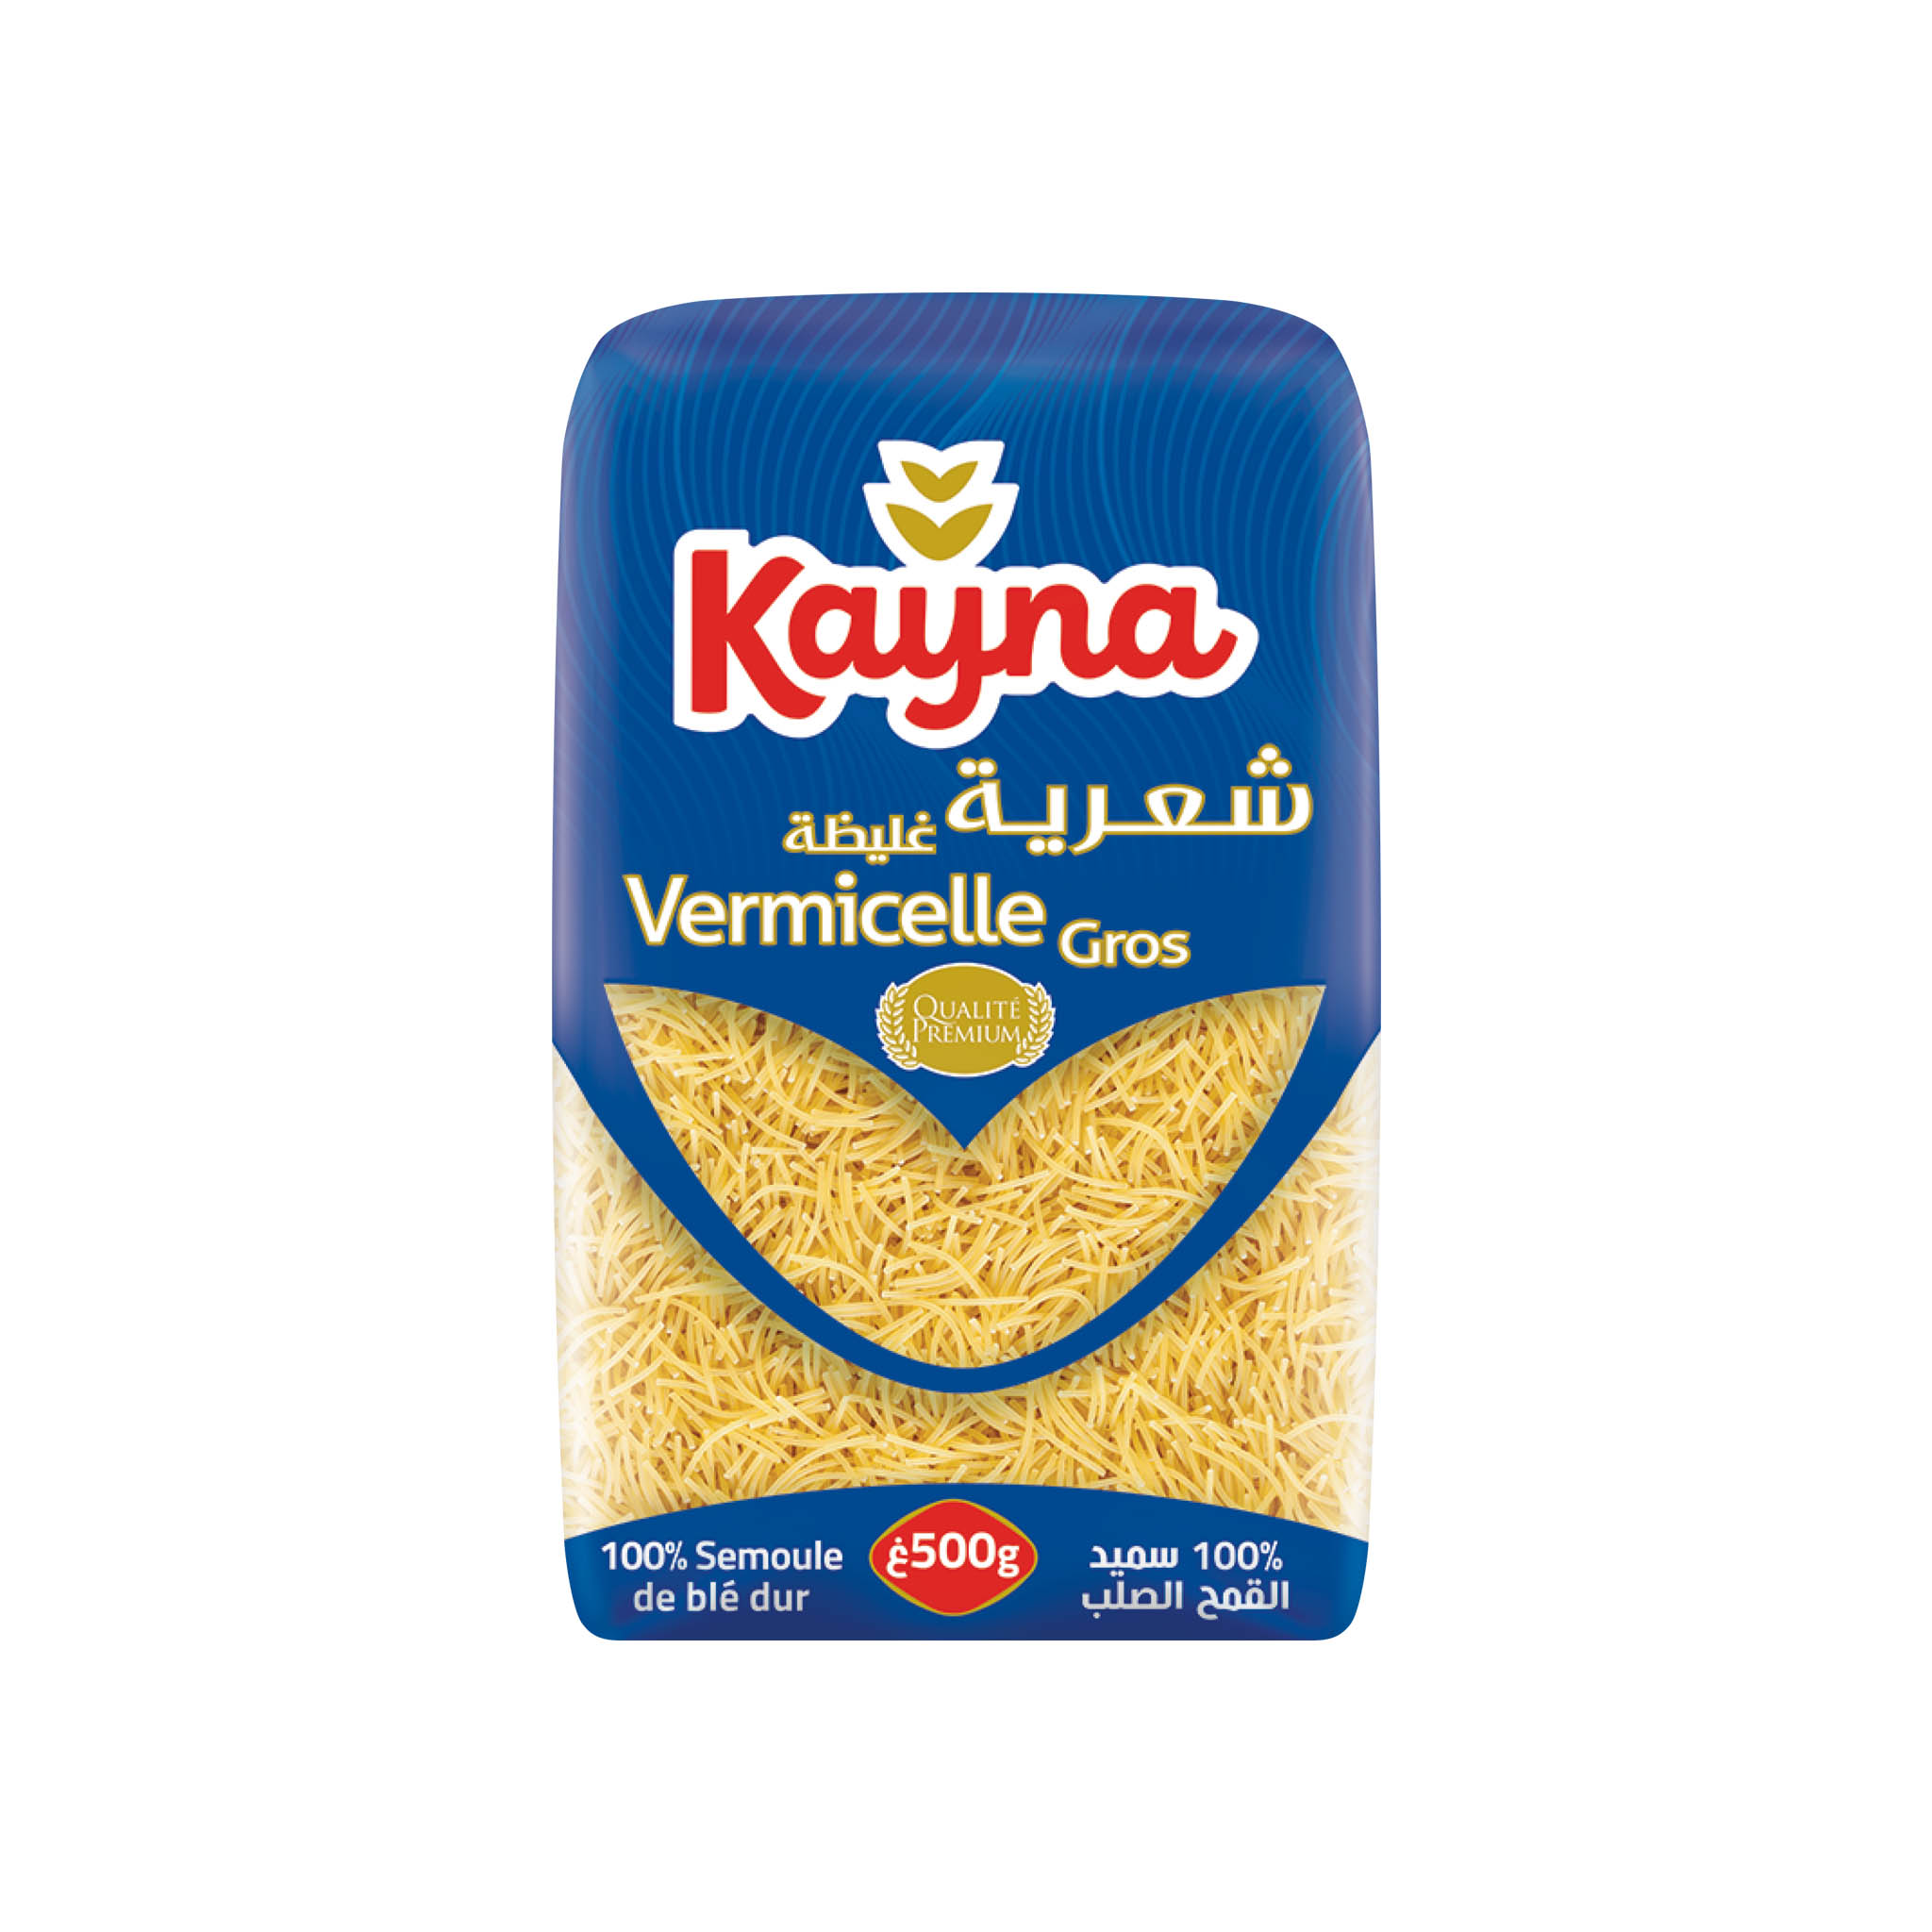 KAYNA Vermicelle Gros 500g - PRODUCT